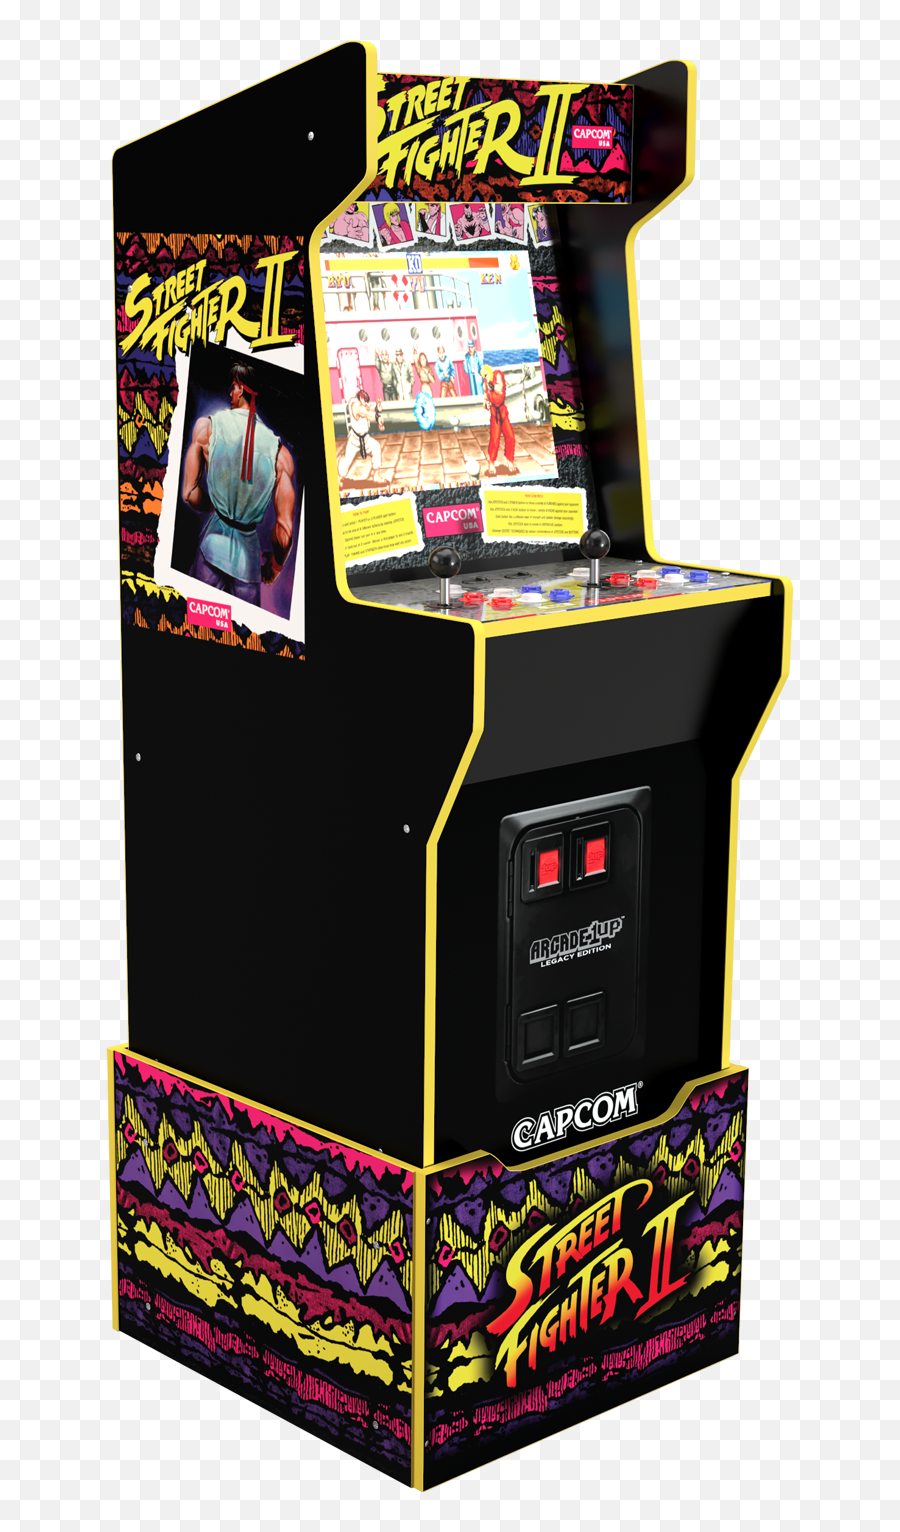 New Arcade1up Arcade Cabinets For Your - Arcade1up Capcom Legacy Png,Street Fighter Desktop Icon